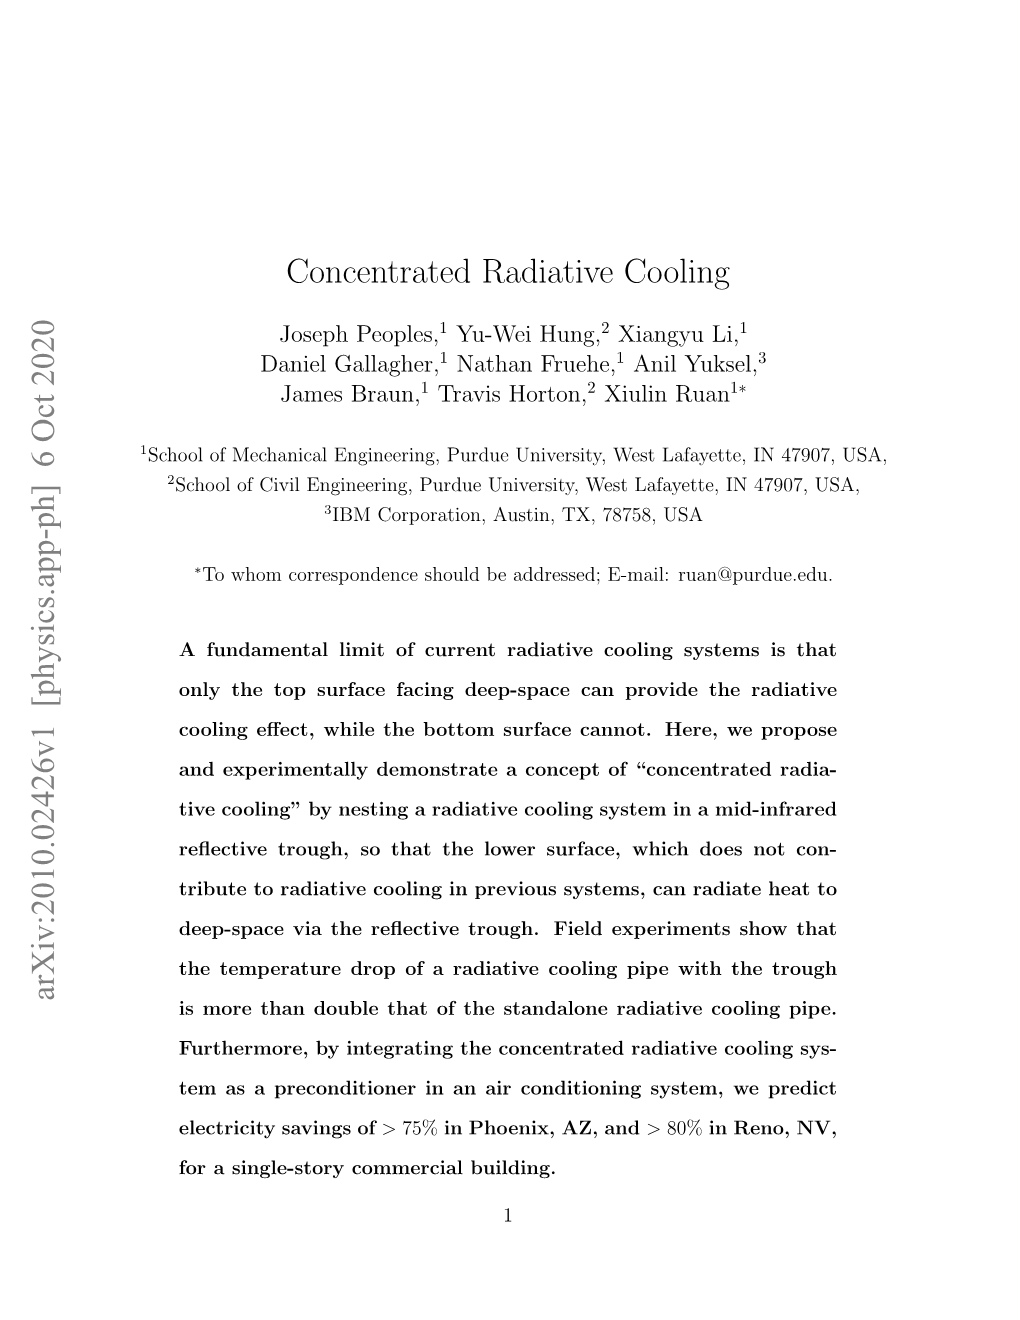 Concentrated Radiative Cooling Arxiv:2010.02426V1 [Physics.App